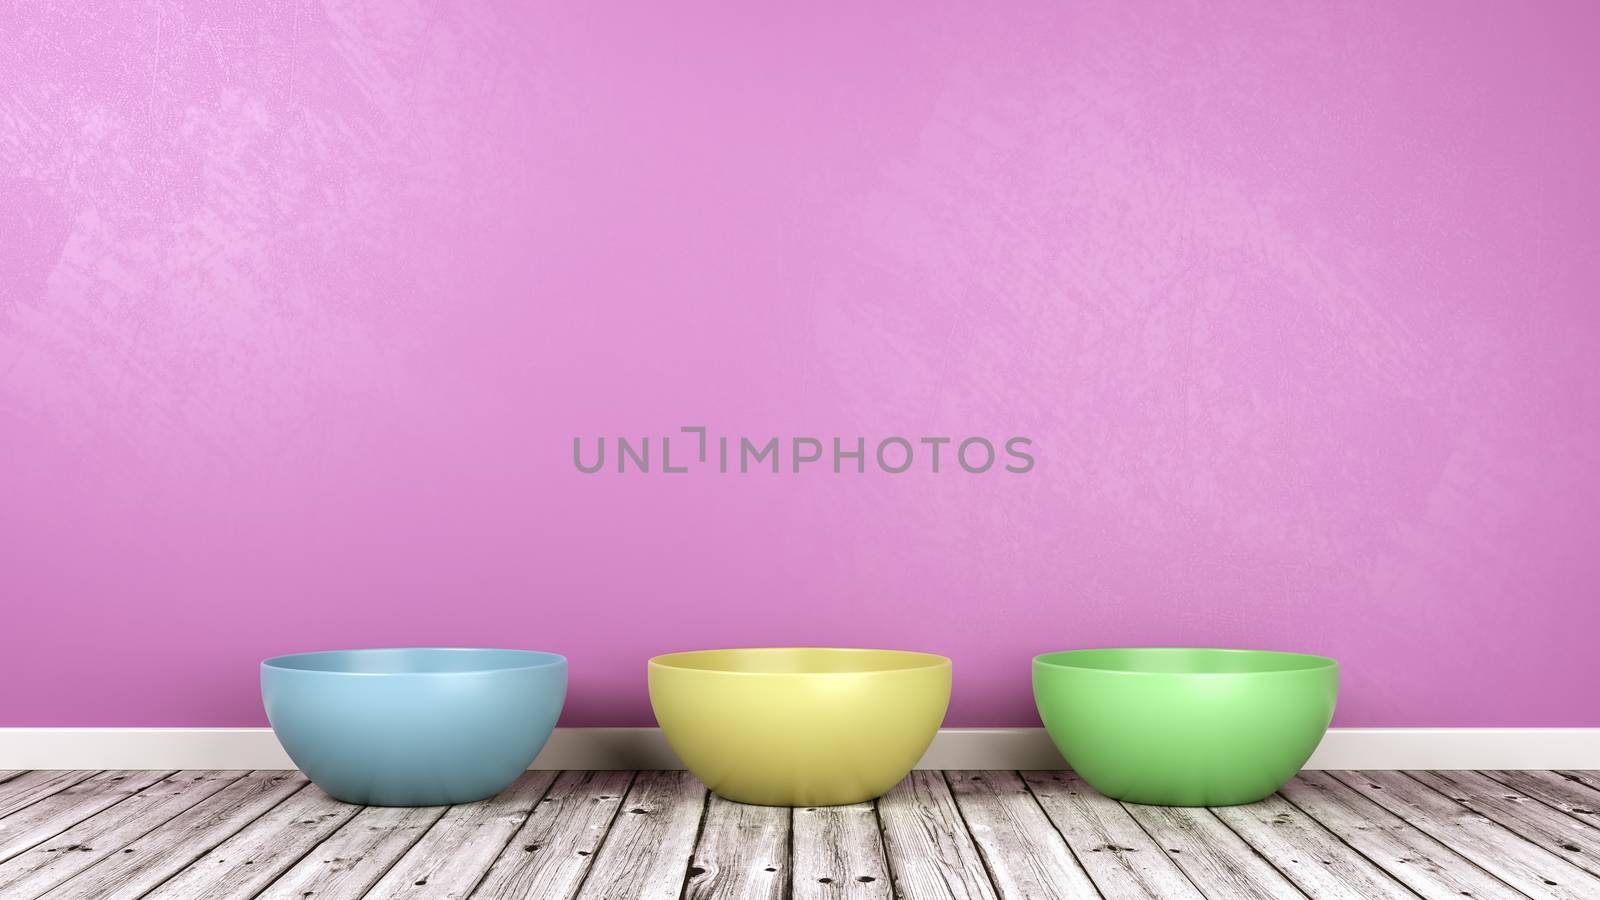 Three Colorful Bowl on Wooden Floor Against Purple Wall with Copy Space 3D Illustration